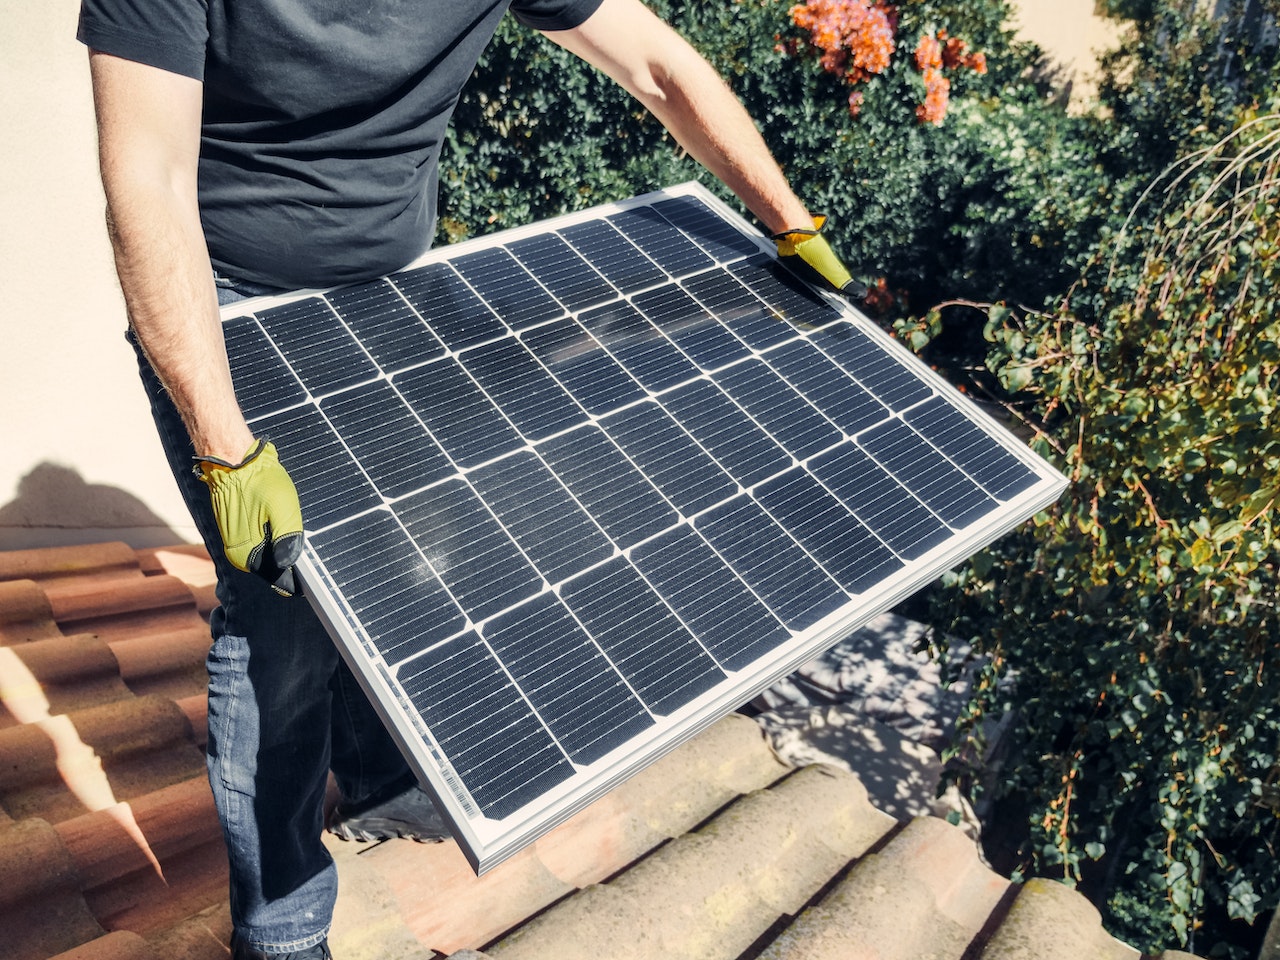 60 vs 72 Cell Solar Panel: Which One is the Best for You?